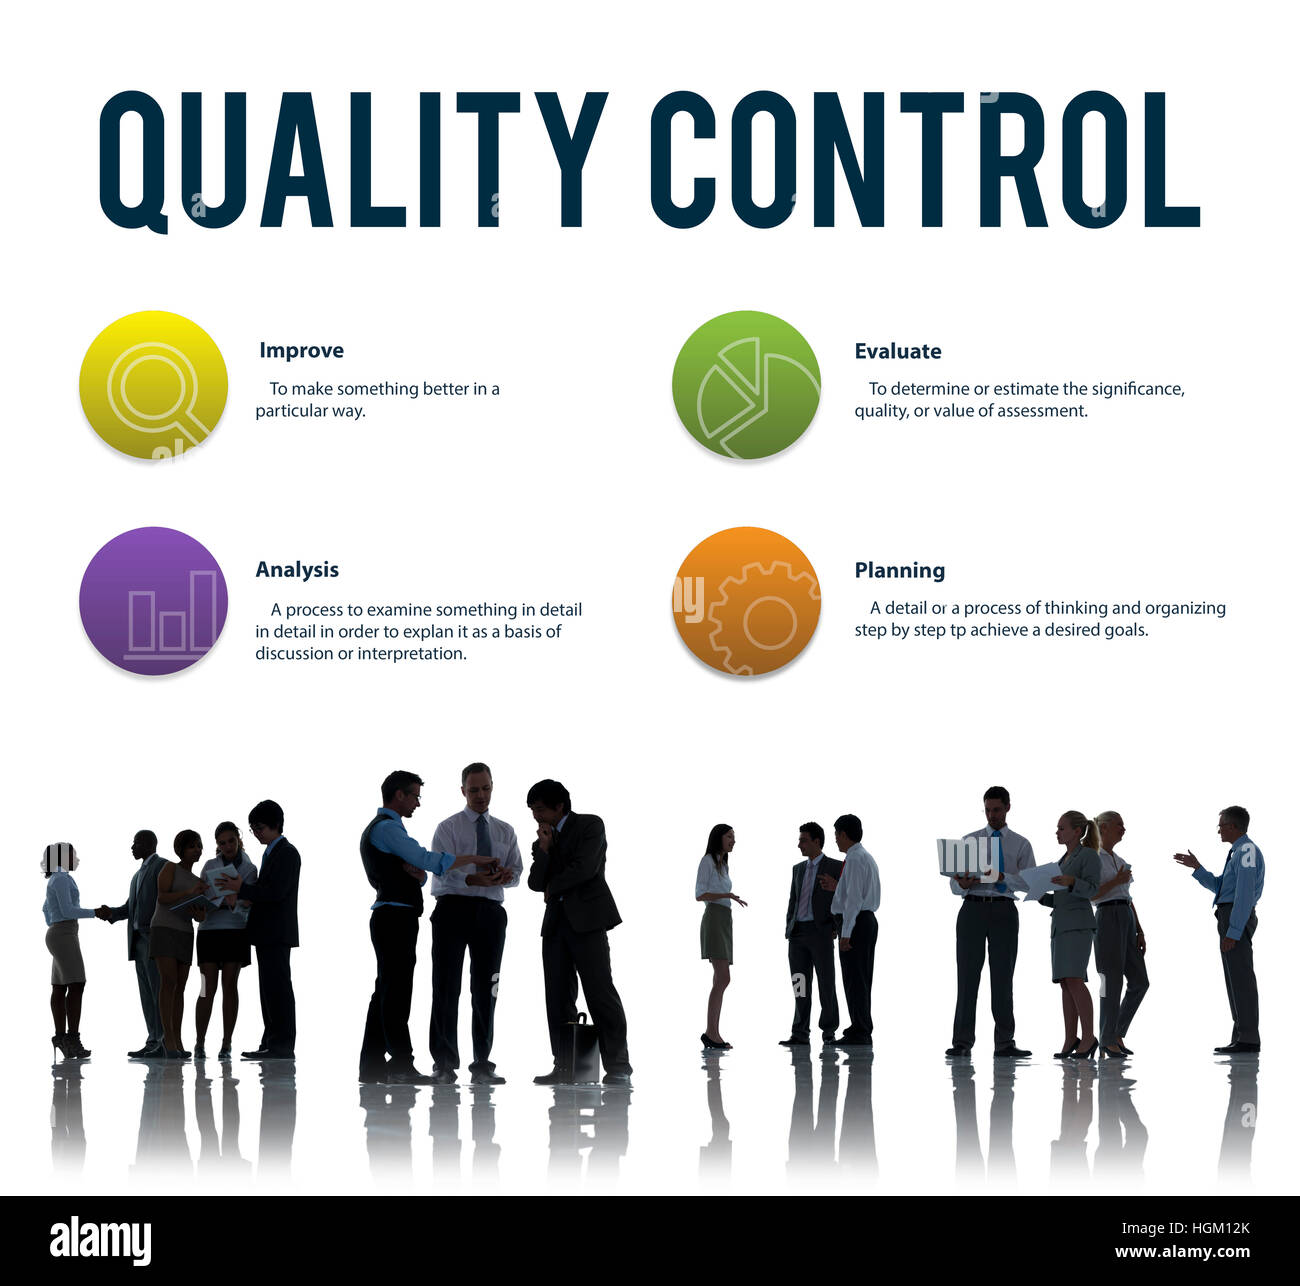 Quality Control Improve Strategy Concept Stock Photo